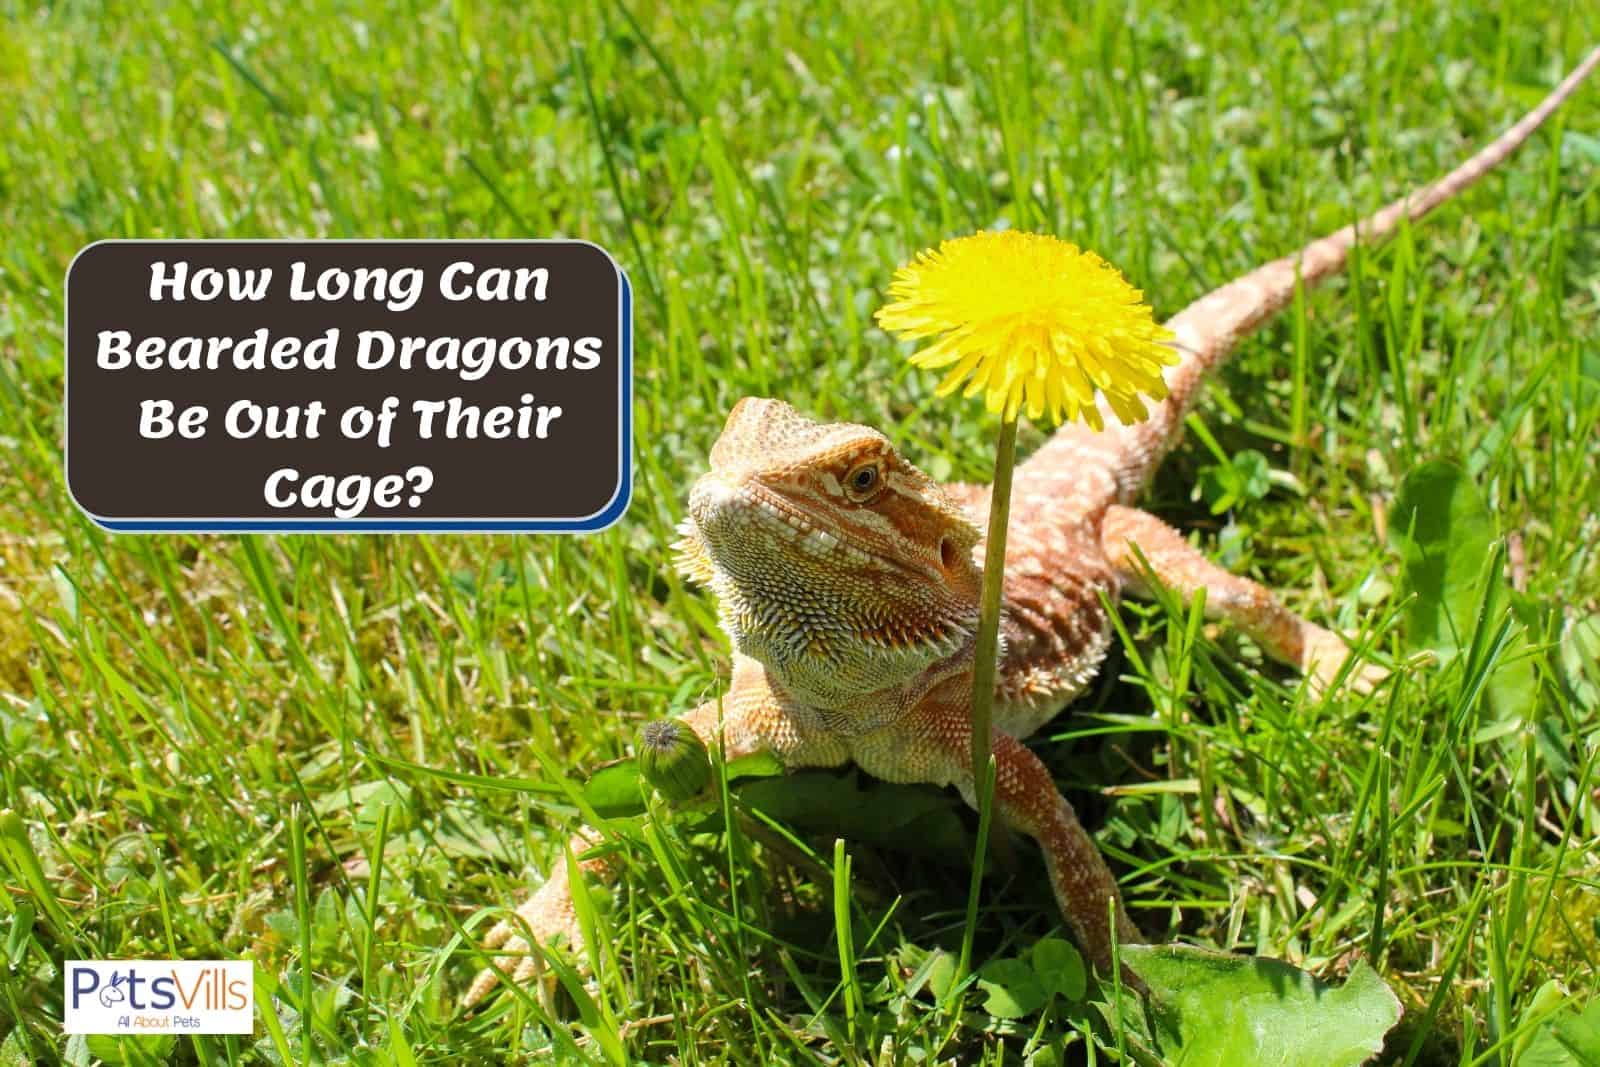 bearded dragon walking on the grasses but how long can bearded dragons be out of their cage?